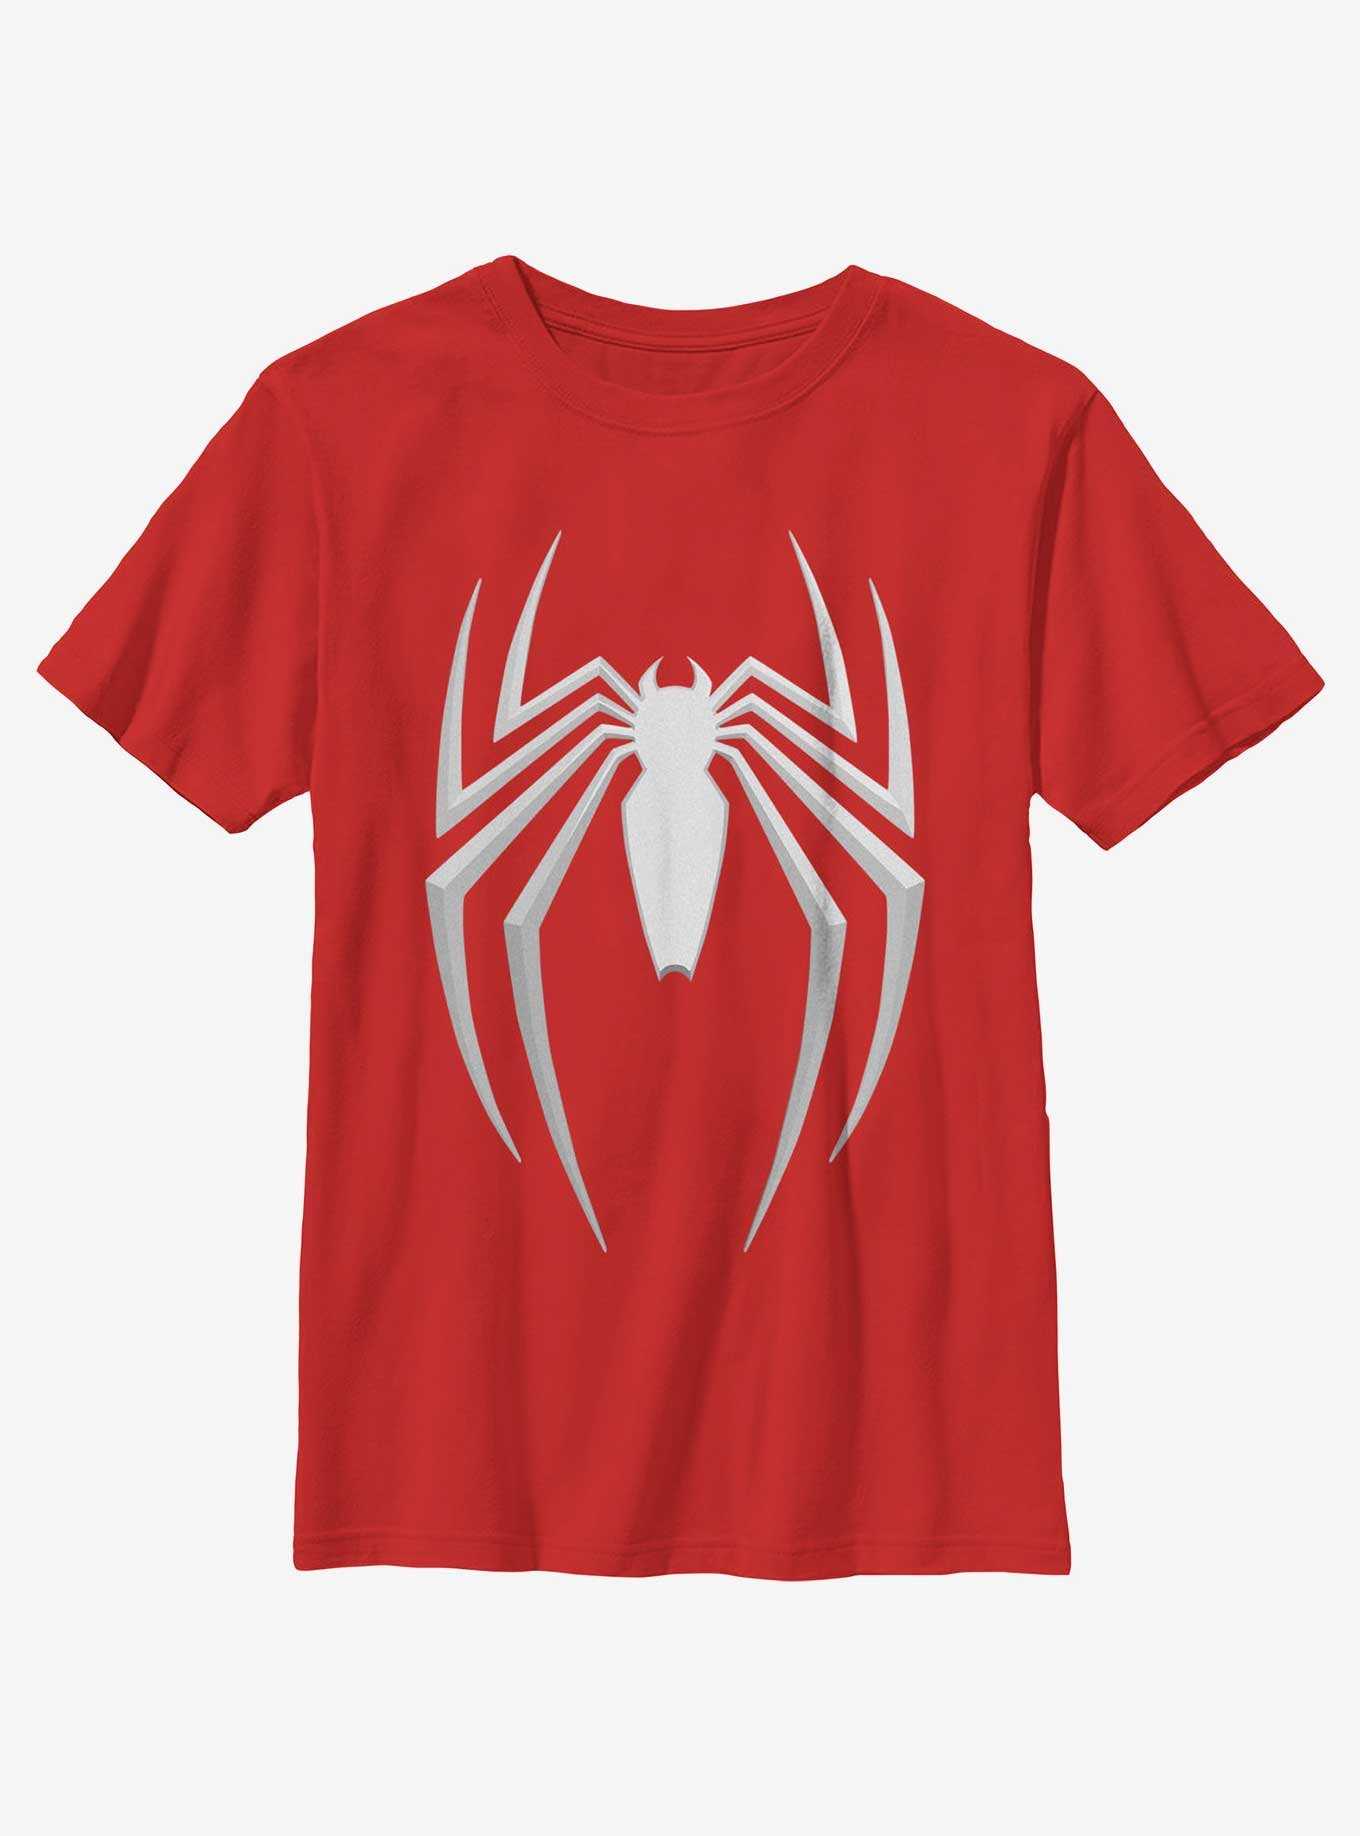 Marvel Spider-Man 2 Game Gray Spider Icon Youth T-Shirt, , hi-res